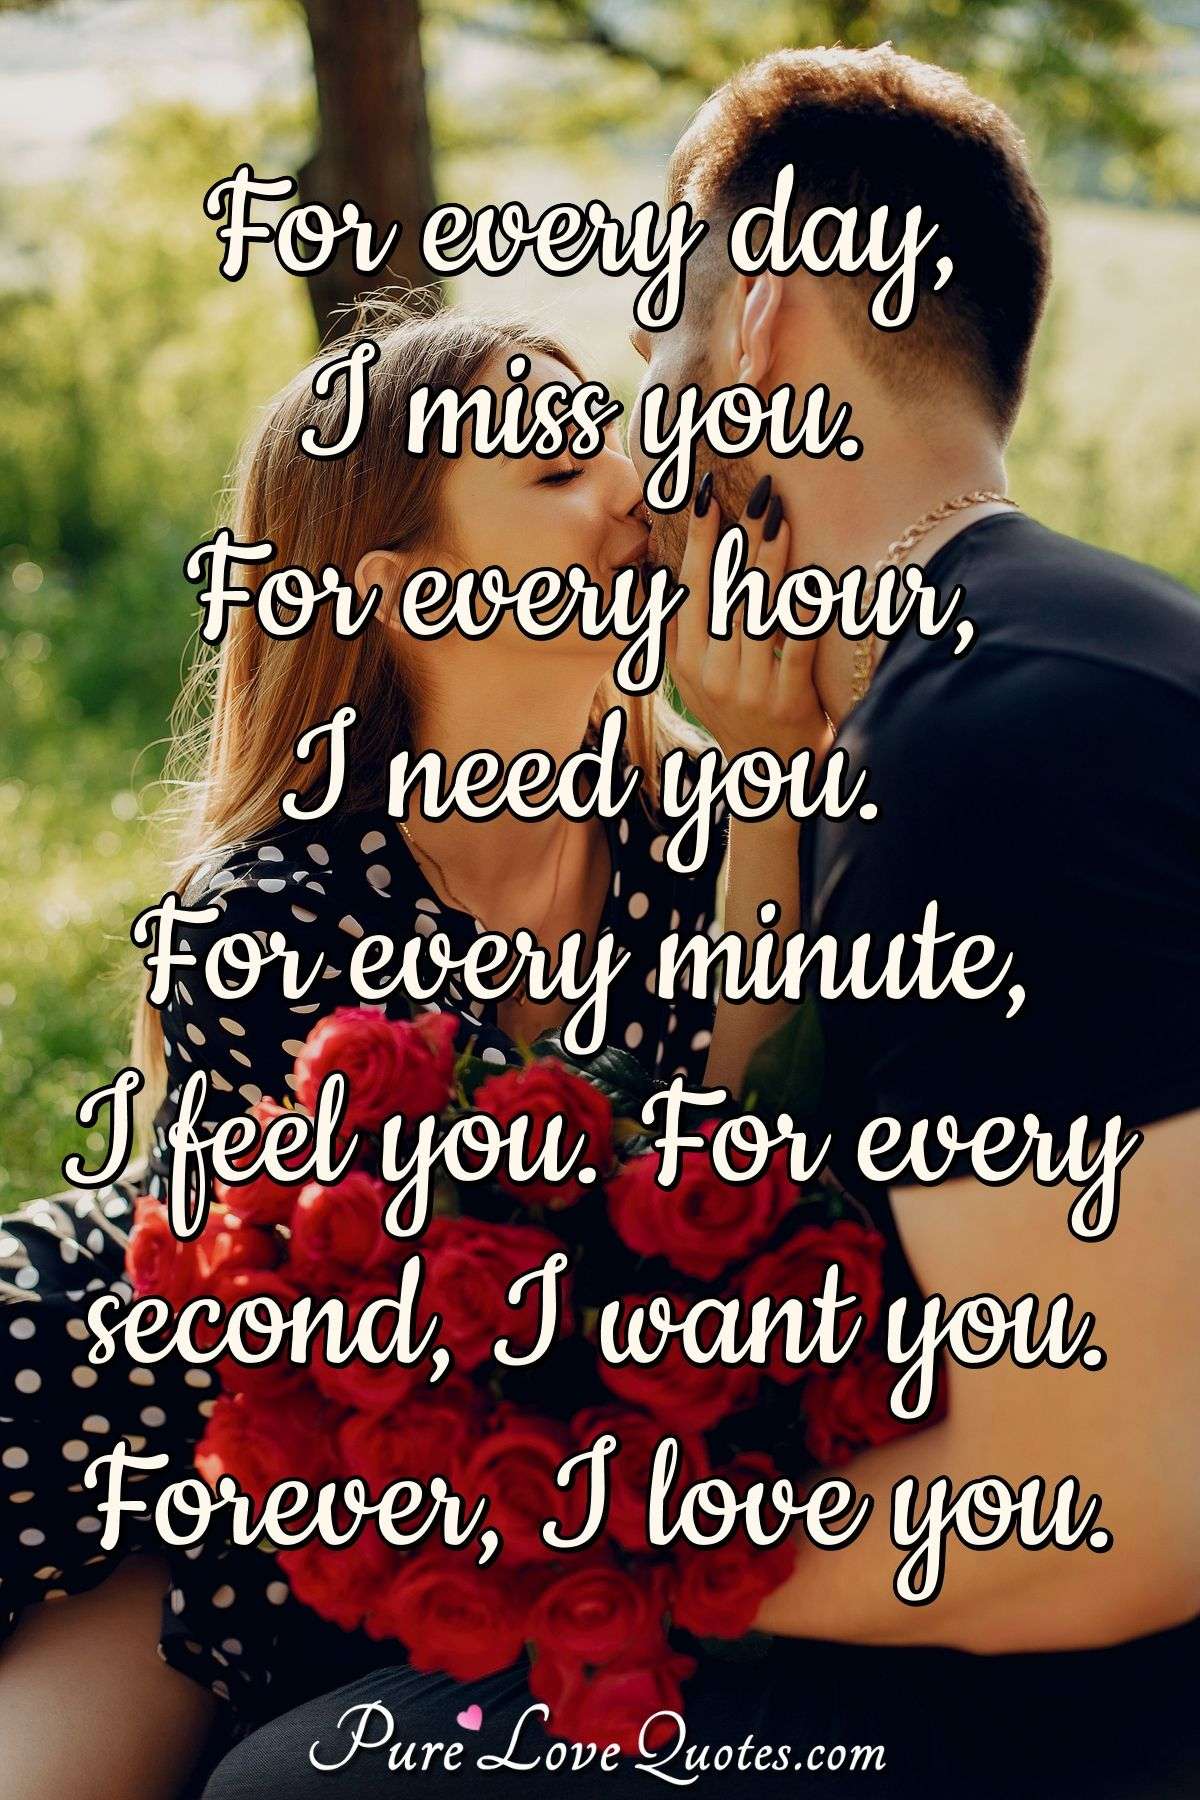 For every day, I miss you. For every hour, I need you. For every minute, I feel you. For every second, I want you. Forever, I love you. - Anonymous